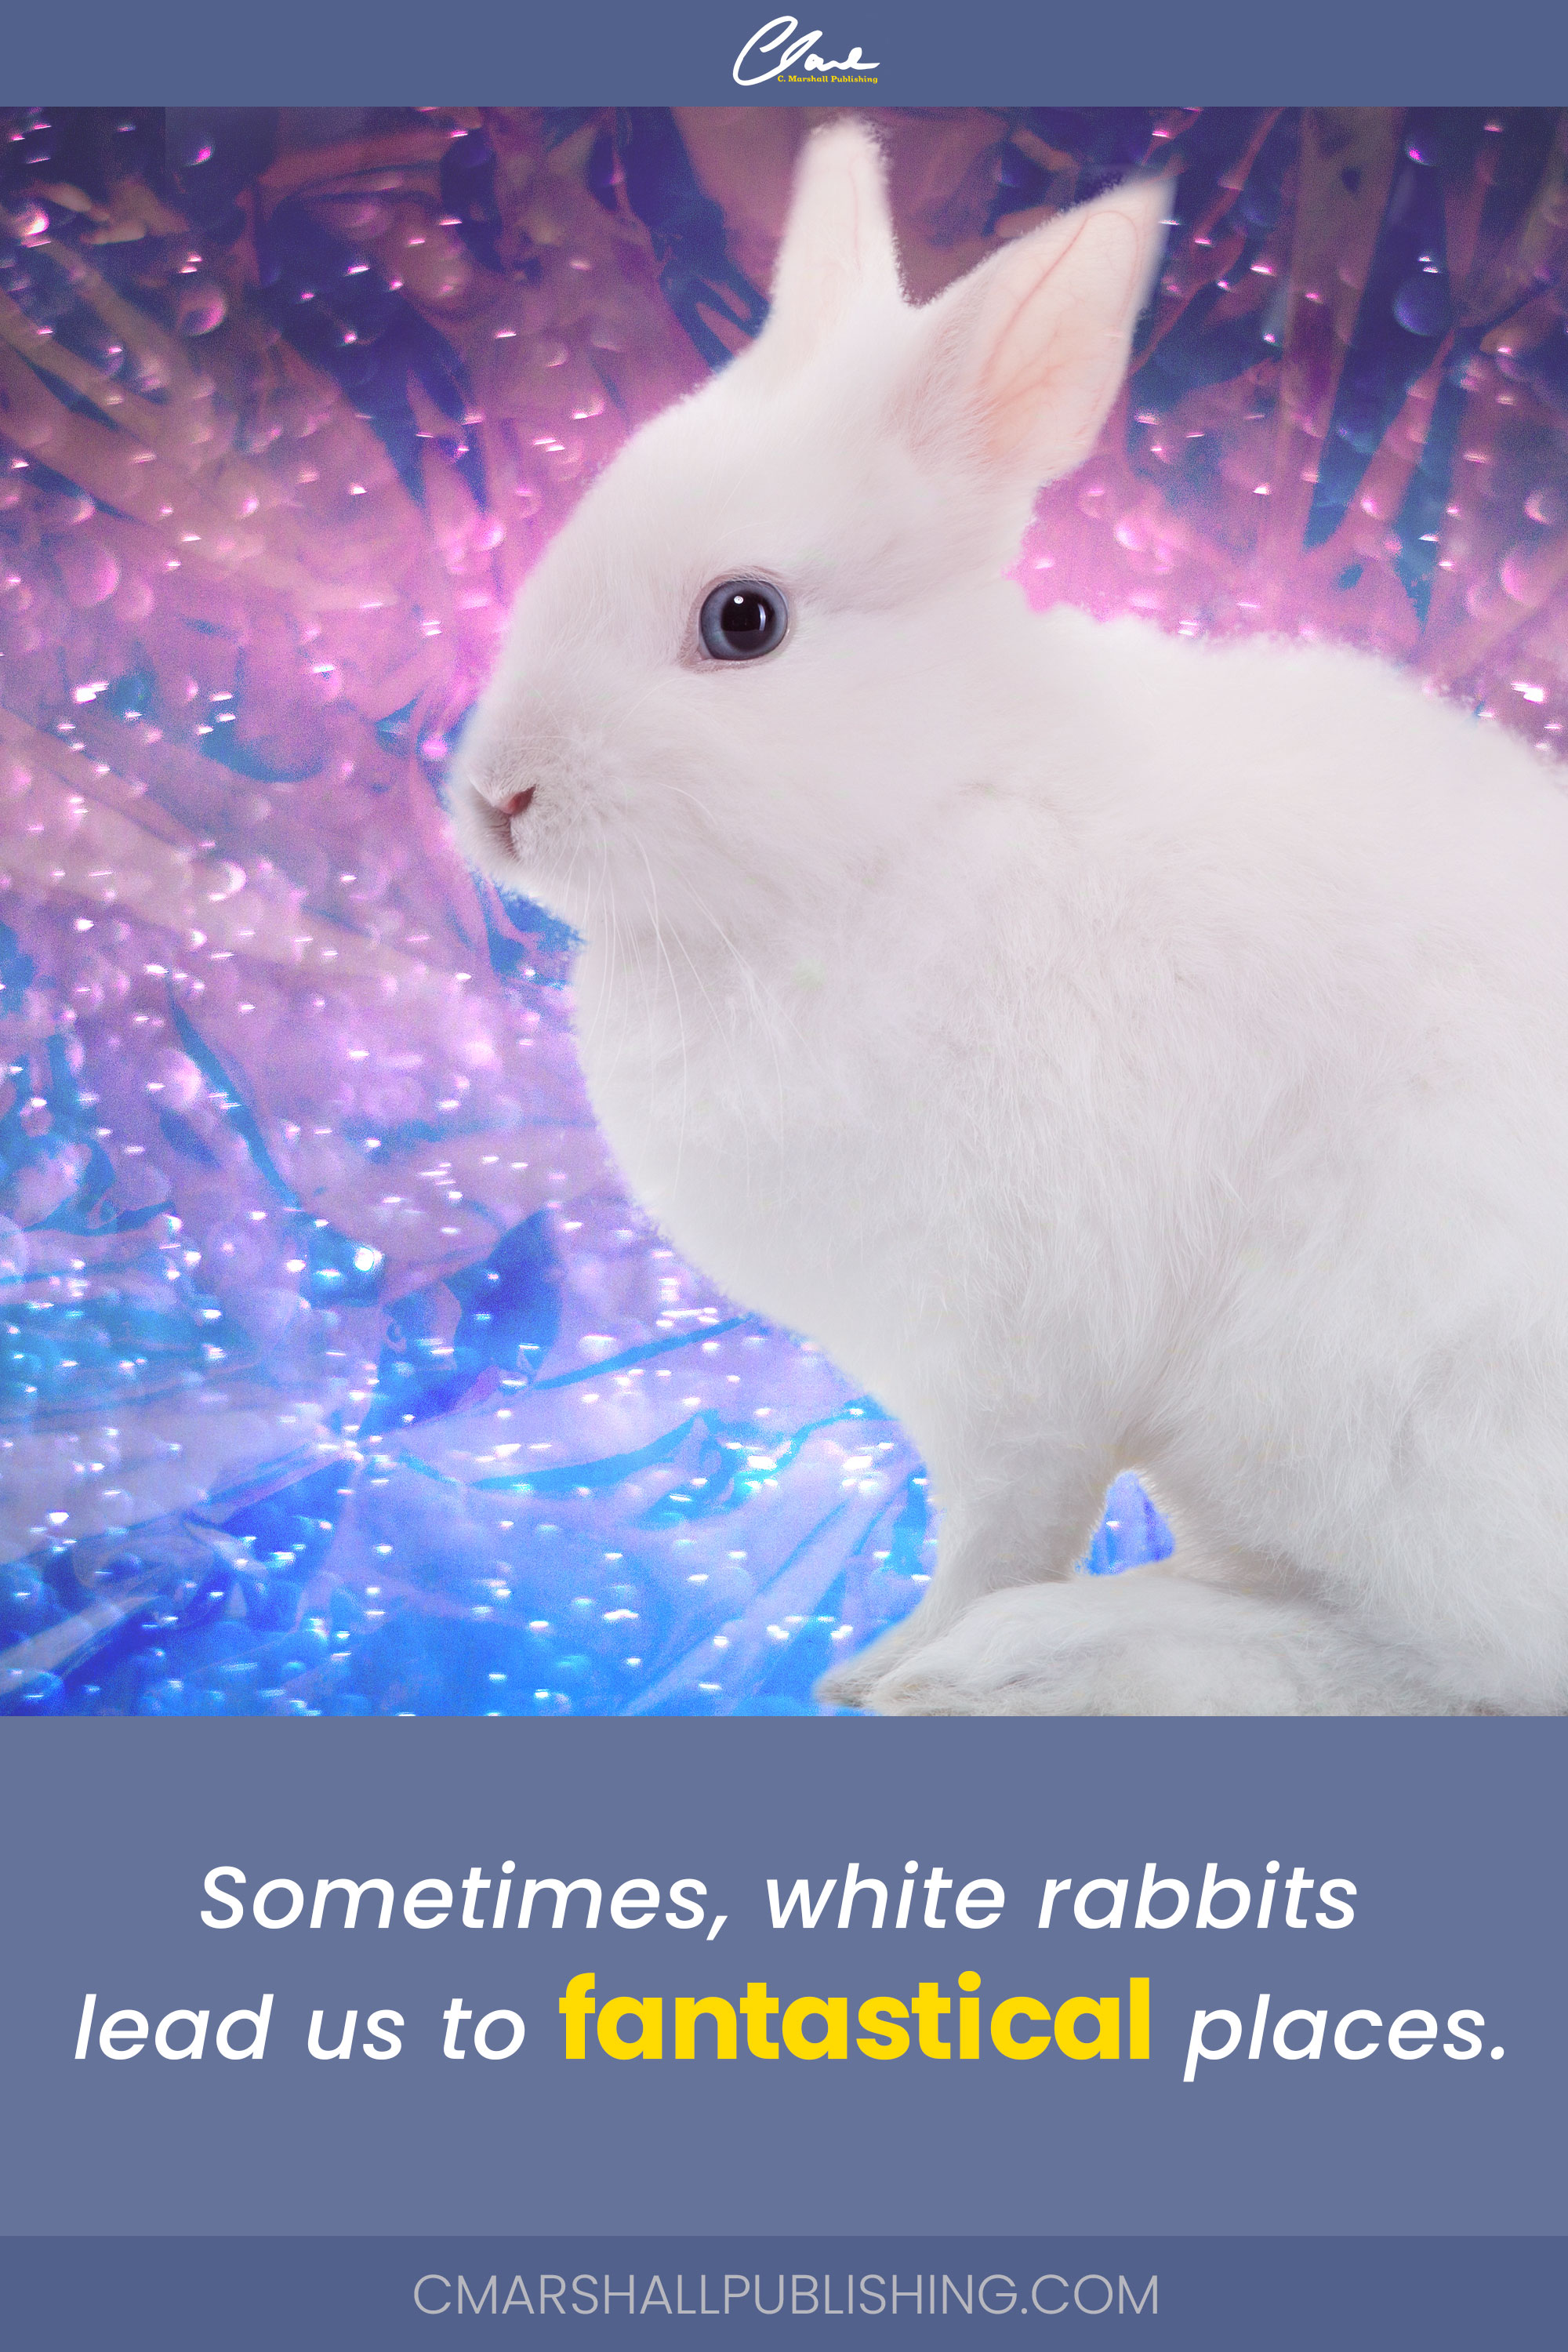 Sometimes, white rabbits lead us to fantastical places